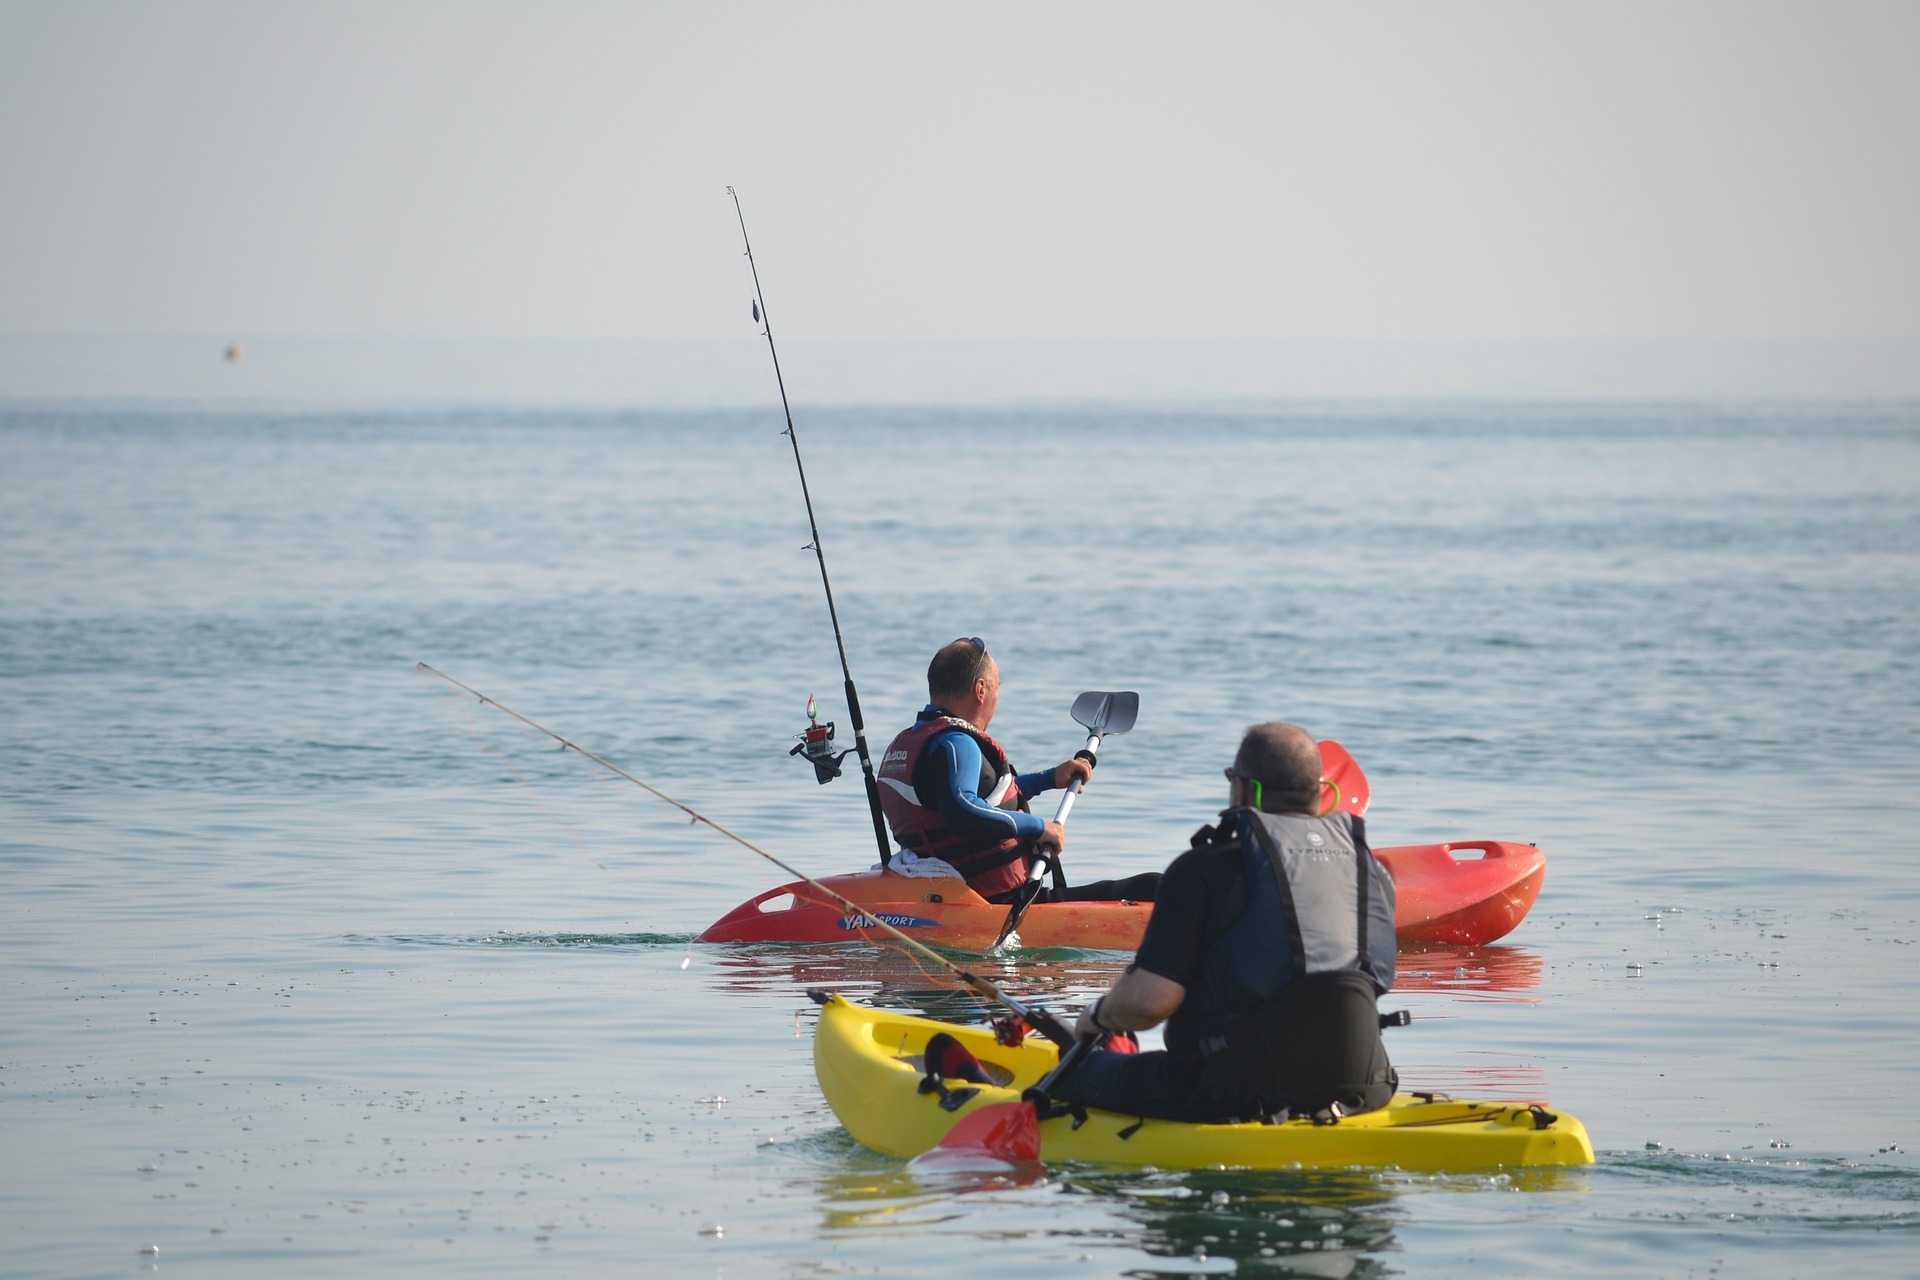 Fishing on the ocean from kayaks